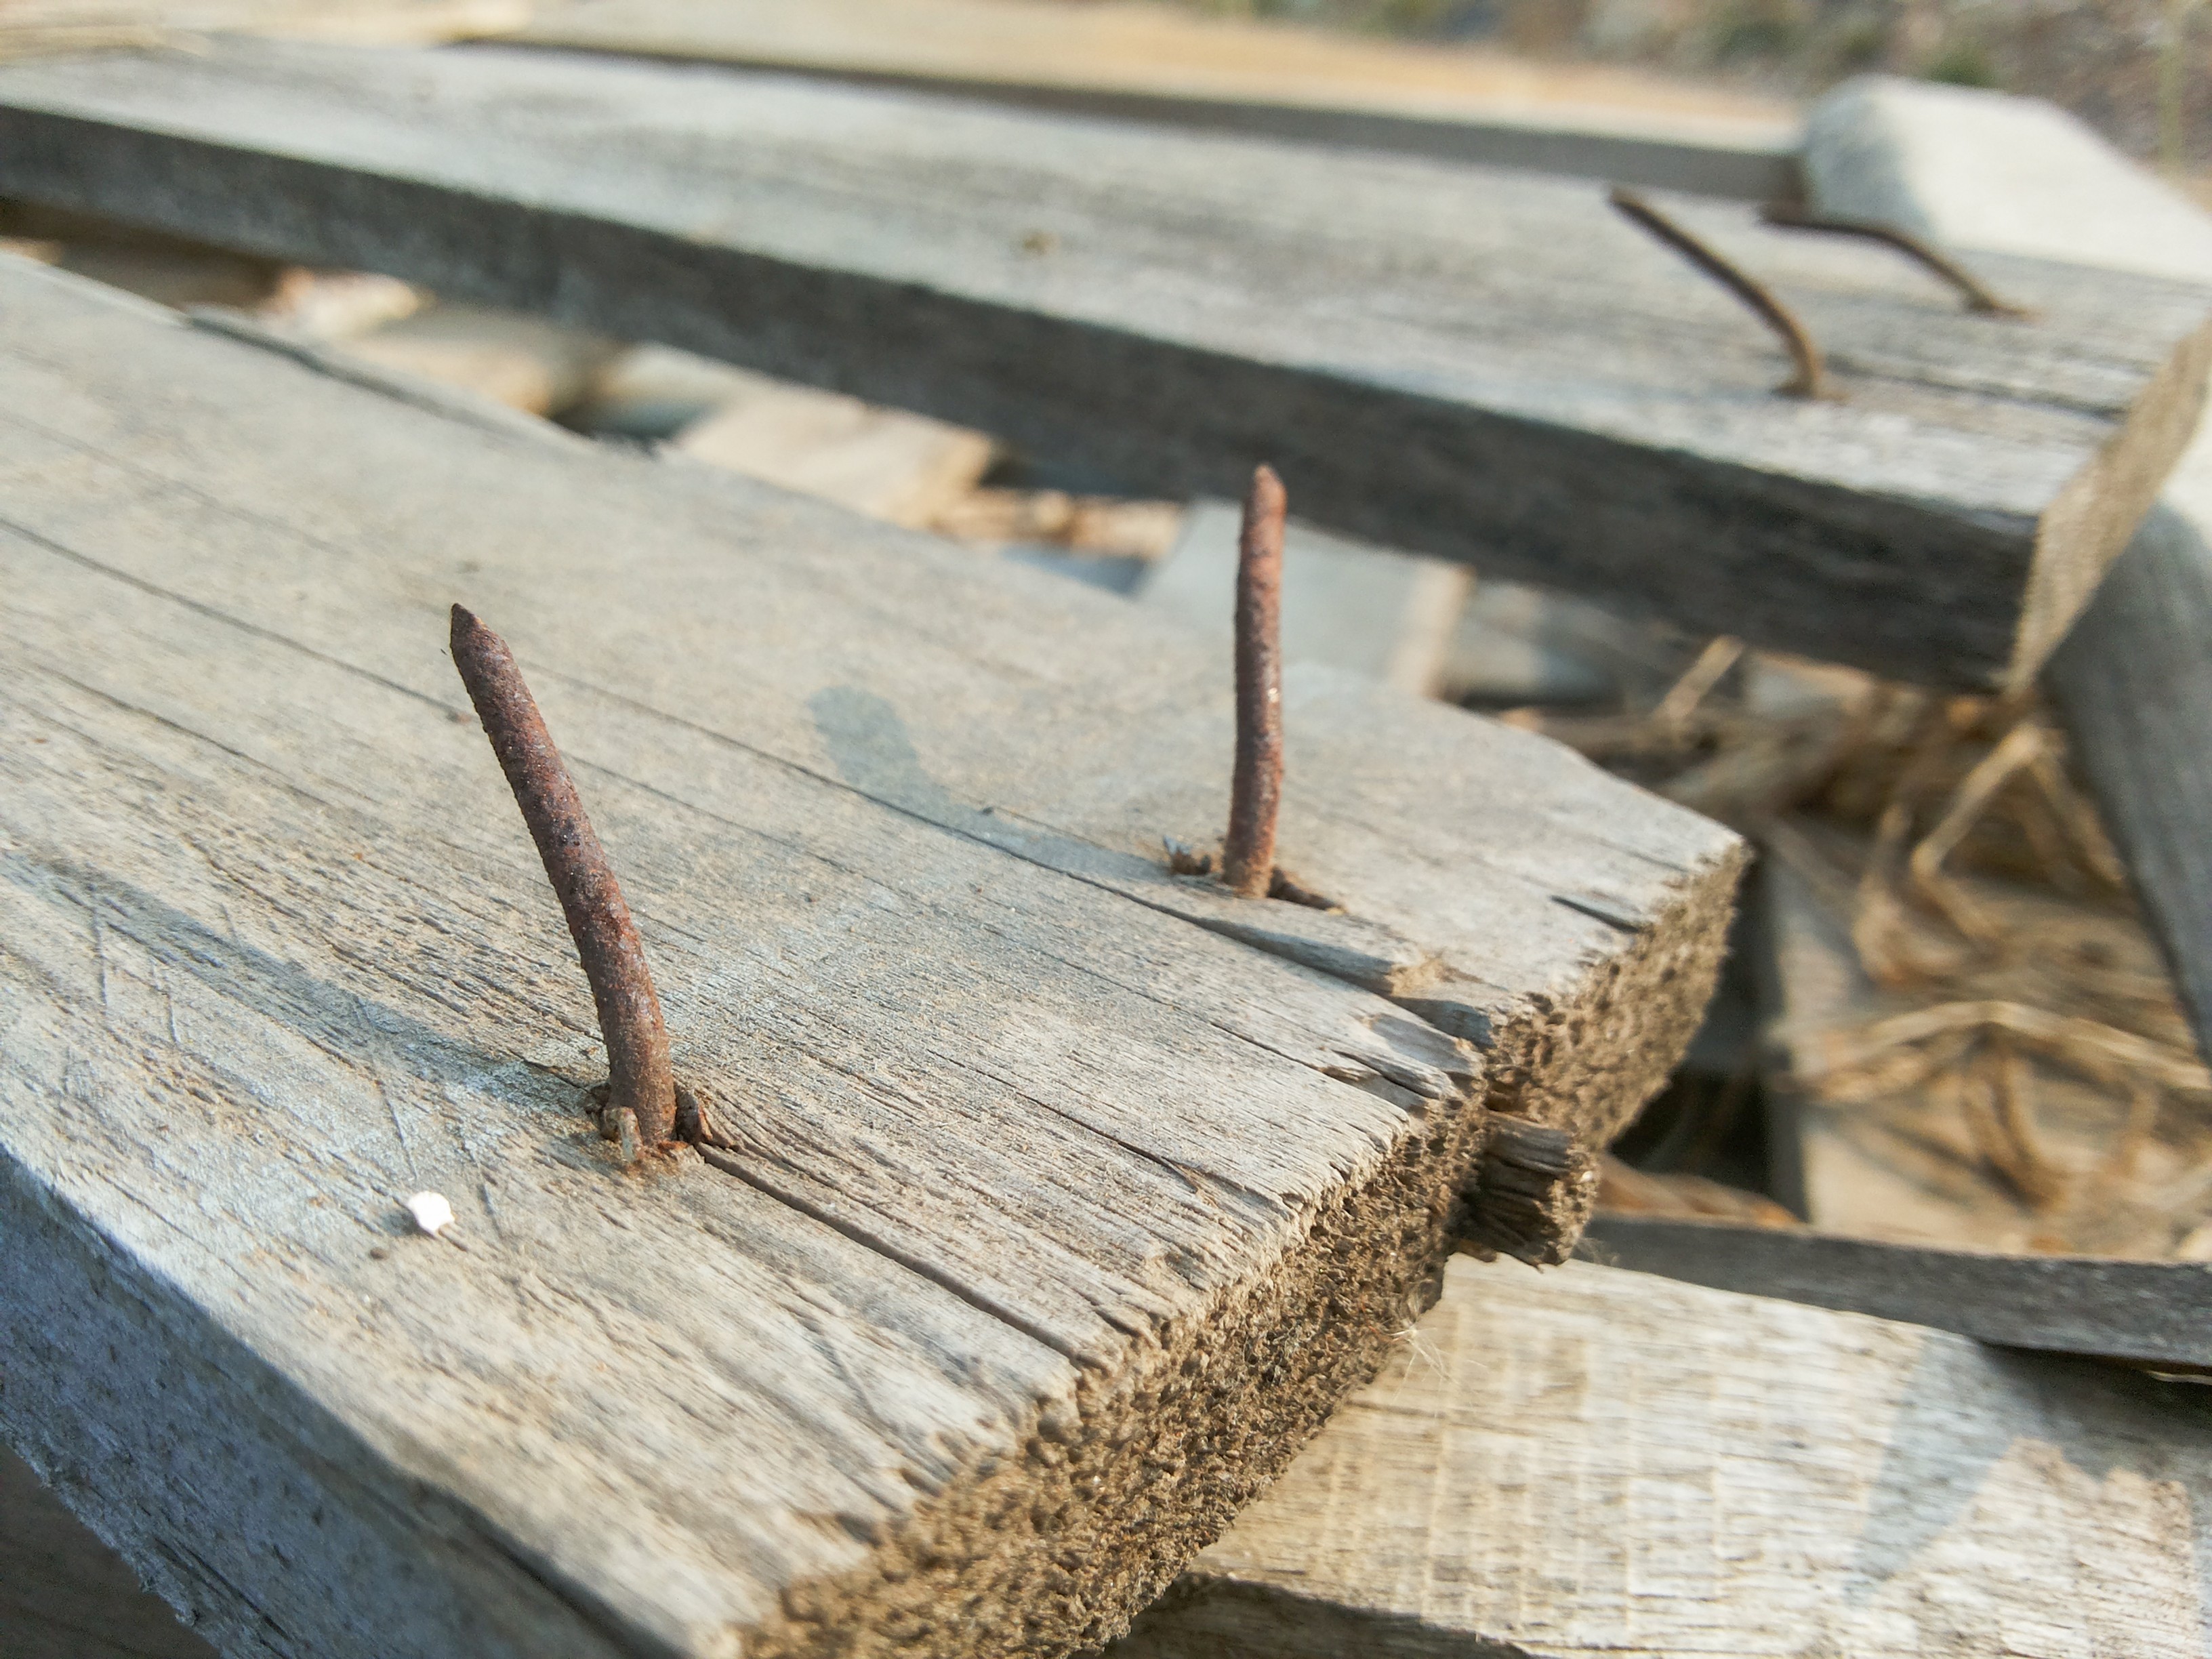 Do Rusty Nails Really Give You Tetanus? | Live Science